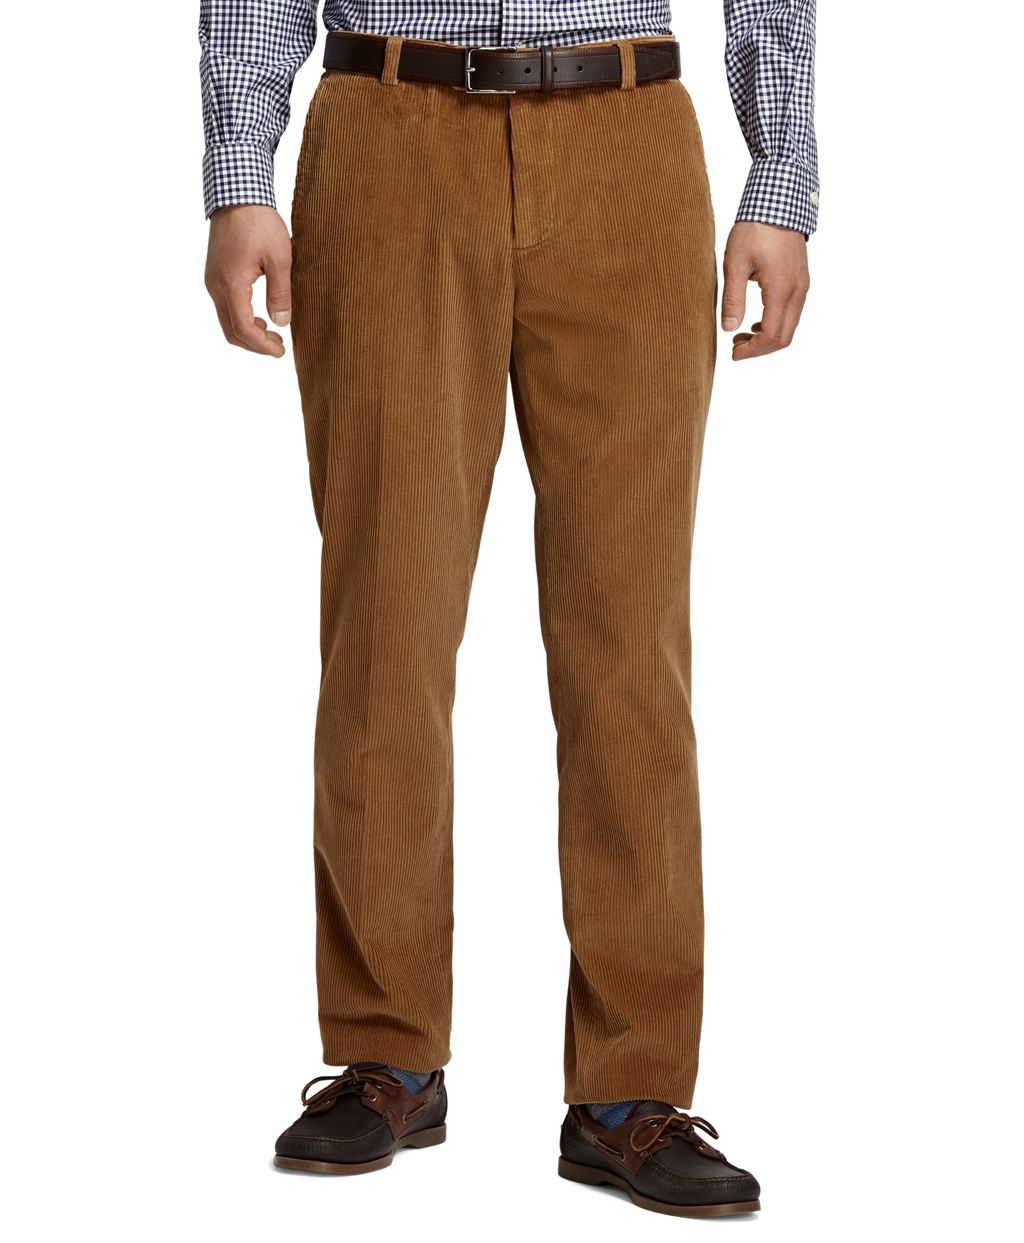 Lyst - Brooks Brothers Milano 8wale Corduroy Pants in Natural for Men